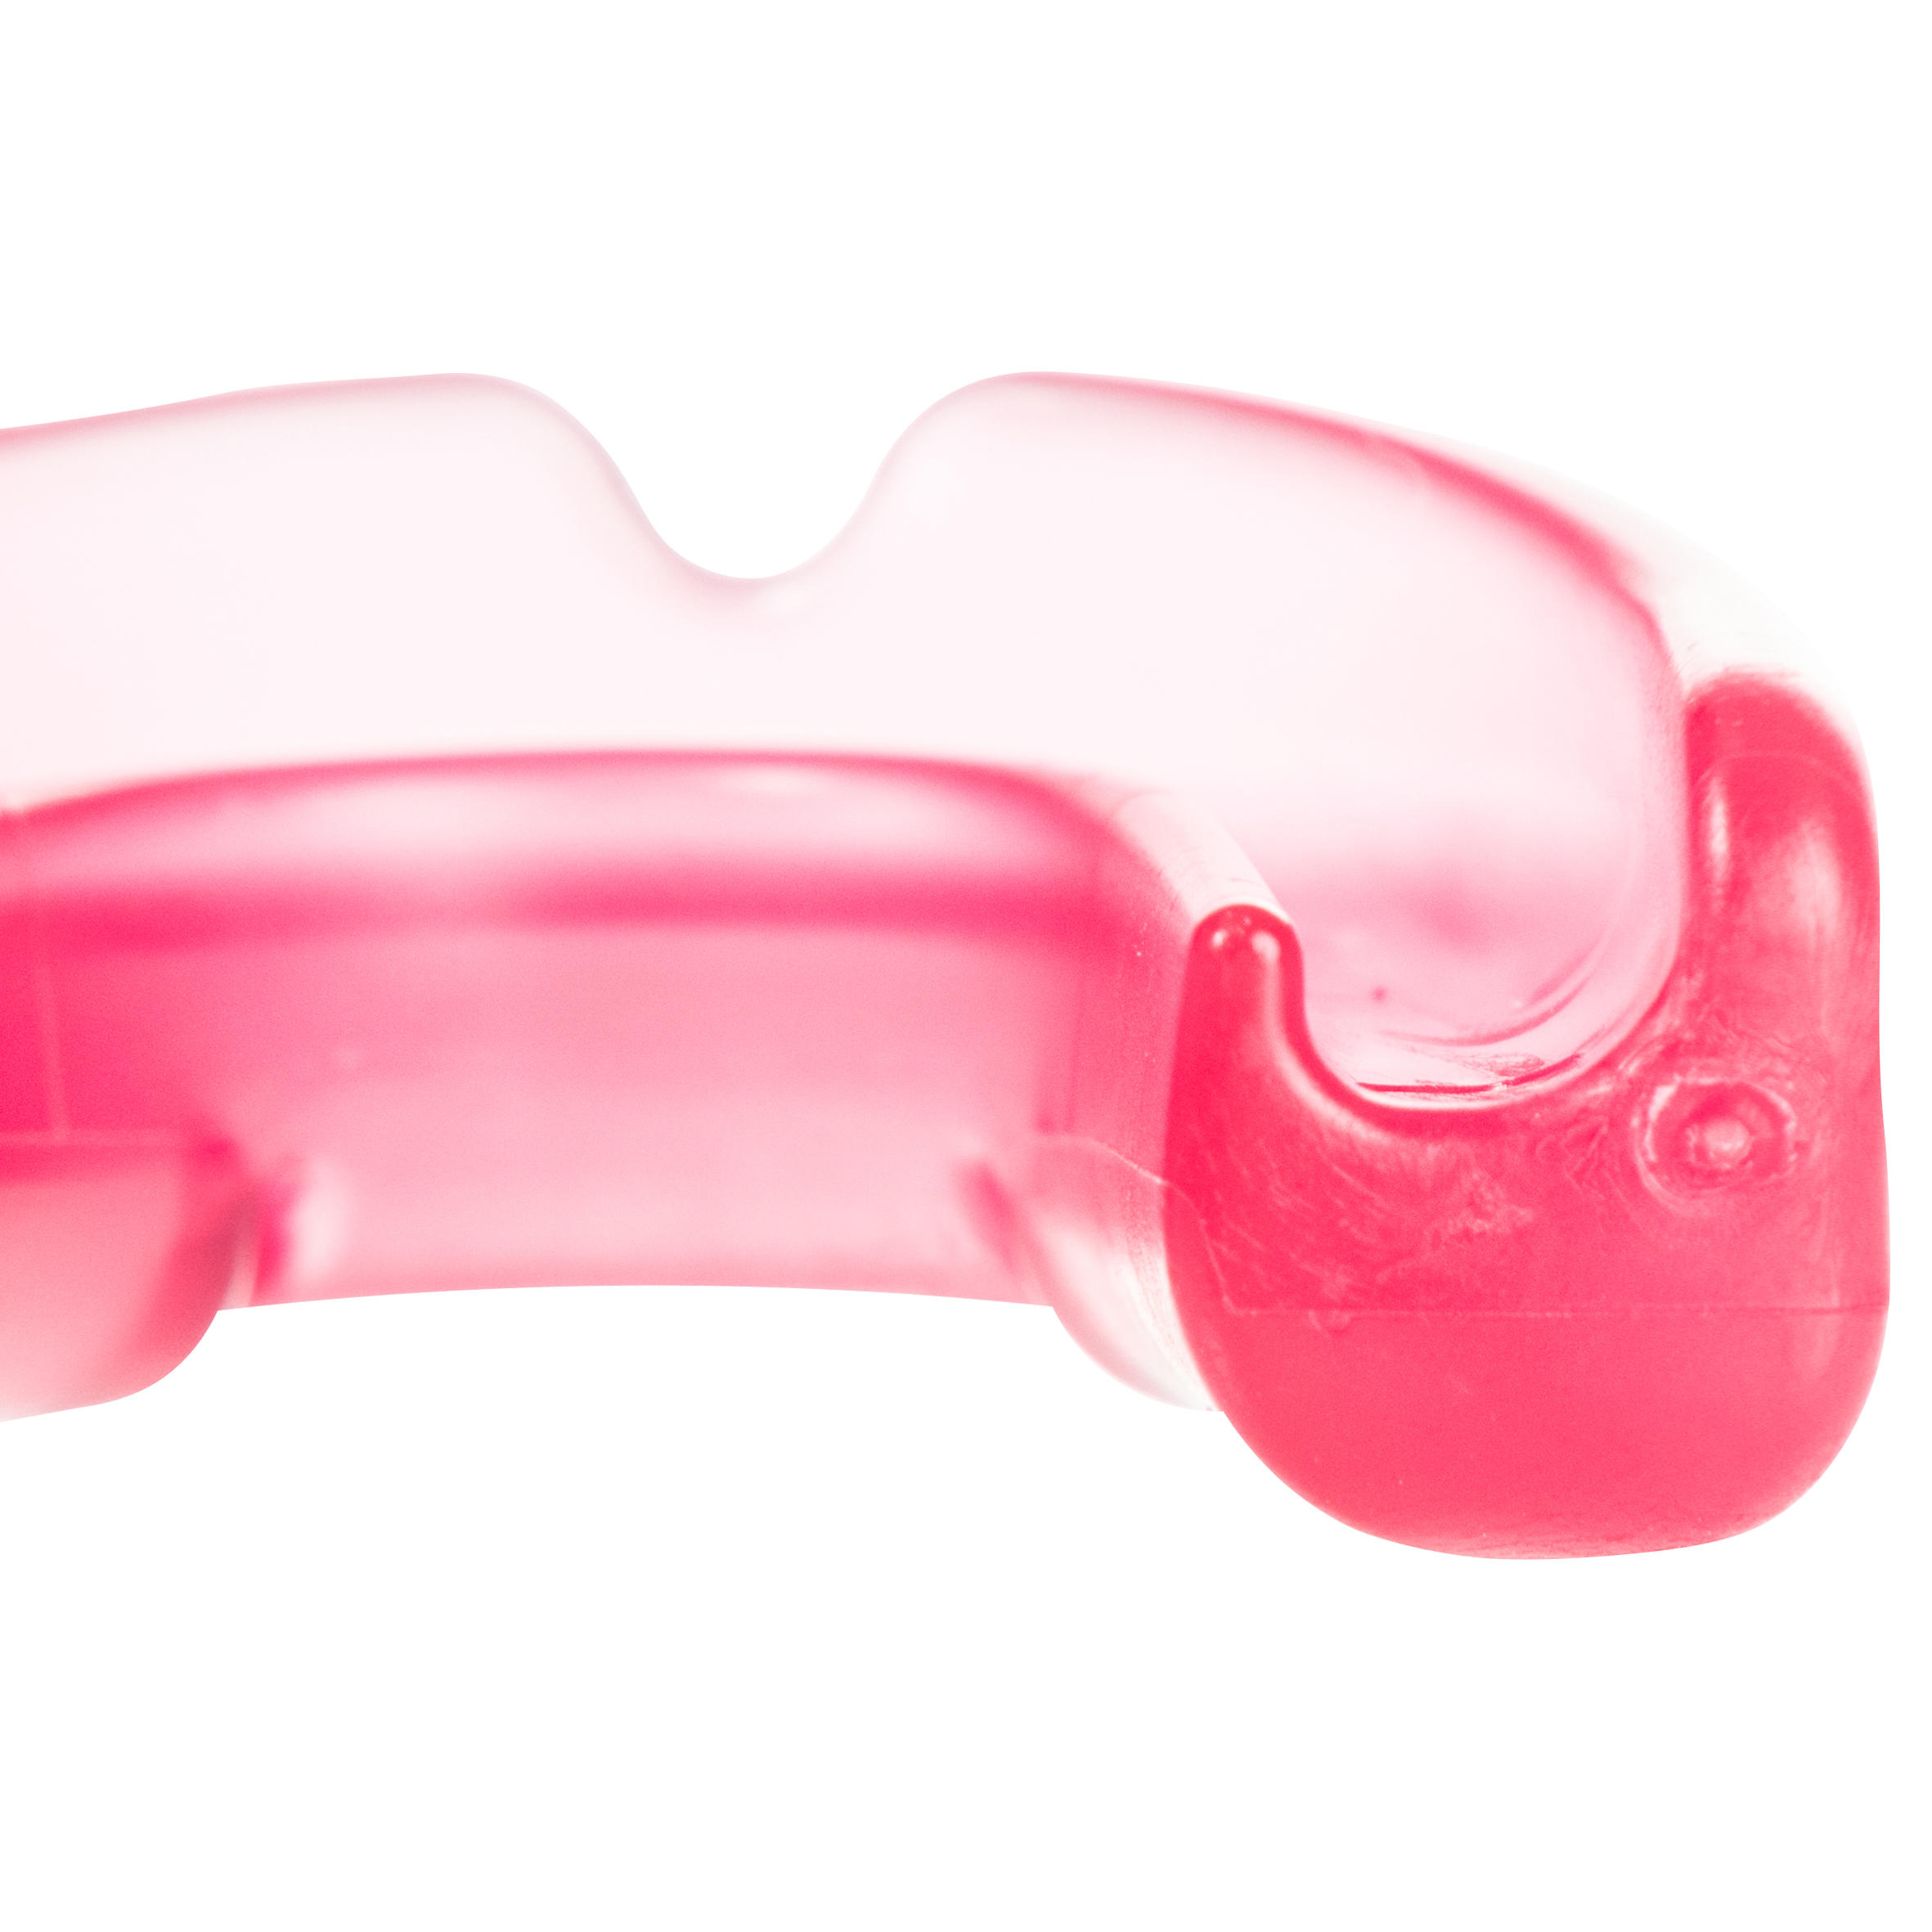 Kids' Low Intensity Field Hockey Mouthguard Size Small FH100 - Pink 4/16